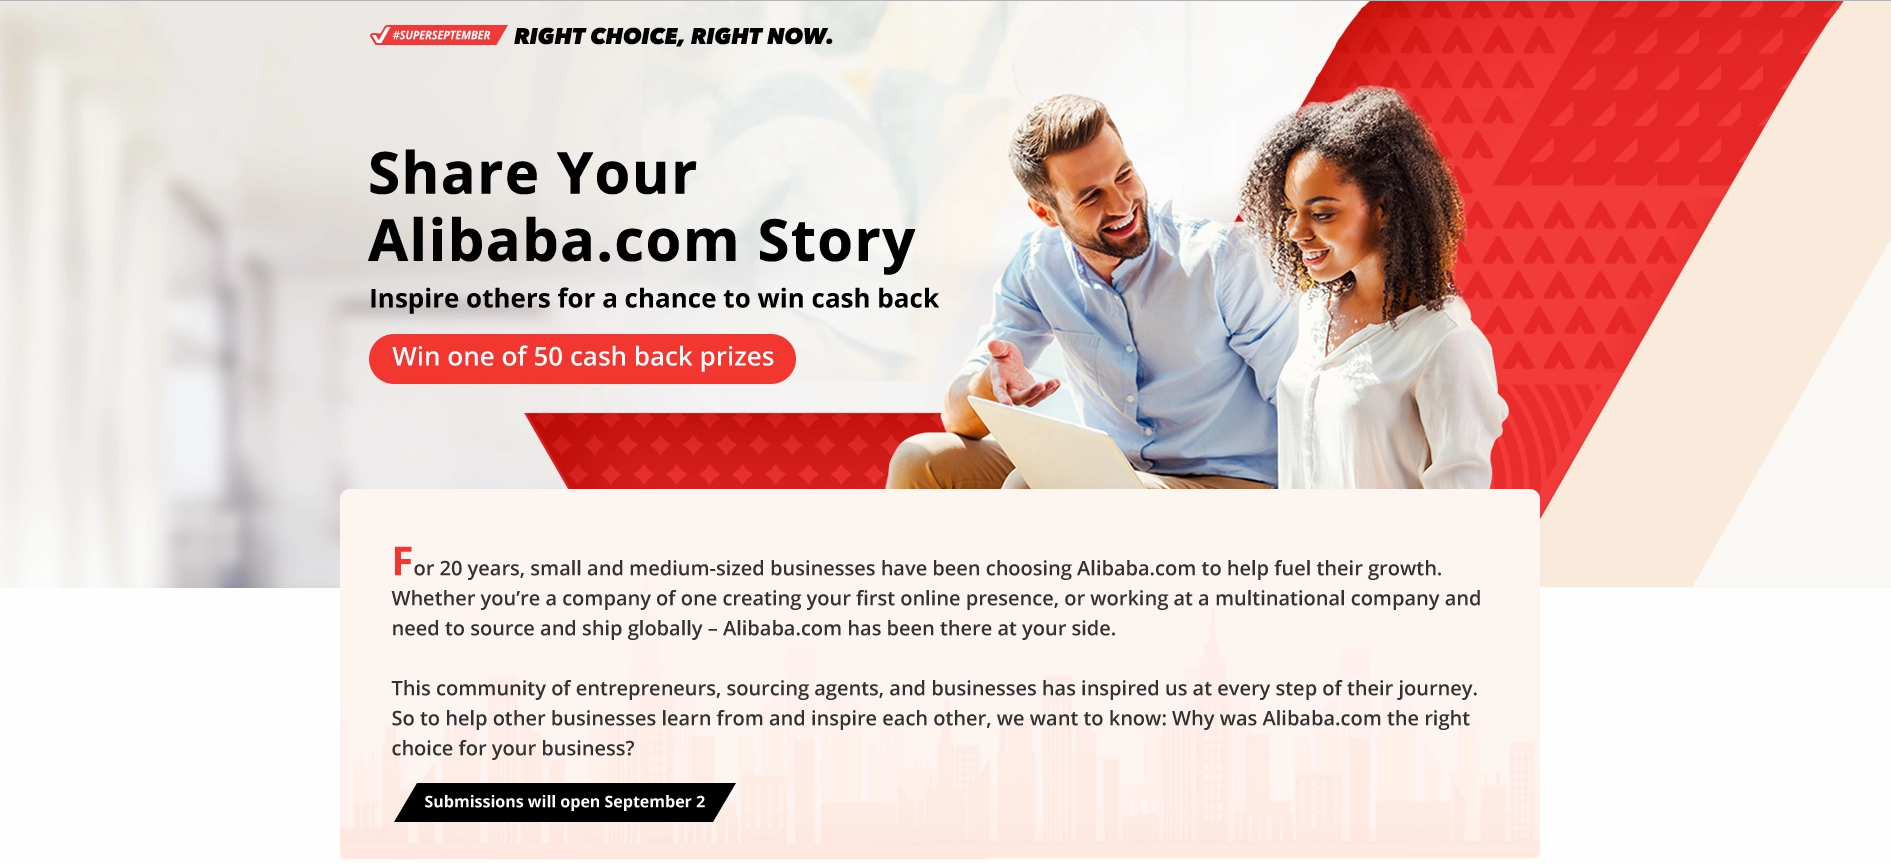 Share Your alibaba Story Inspire others for a chance to win cash back